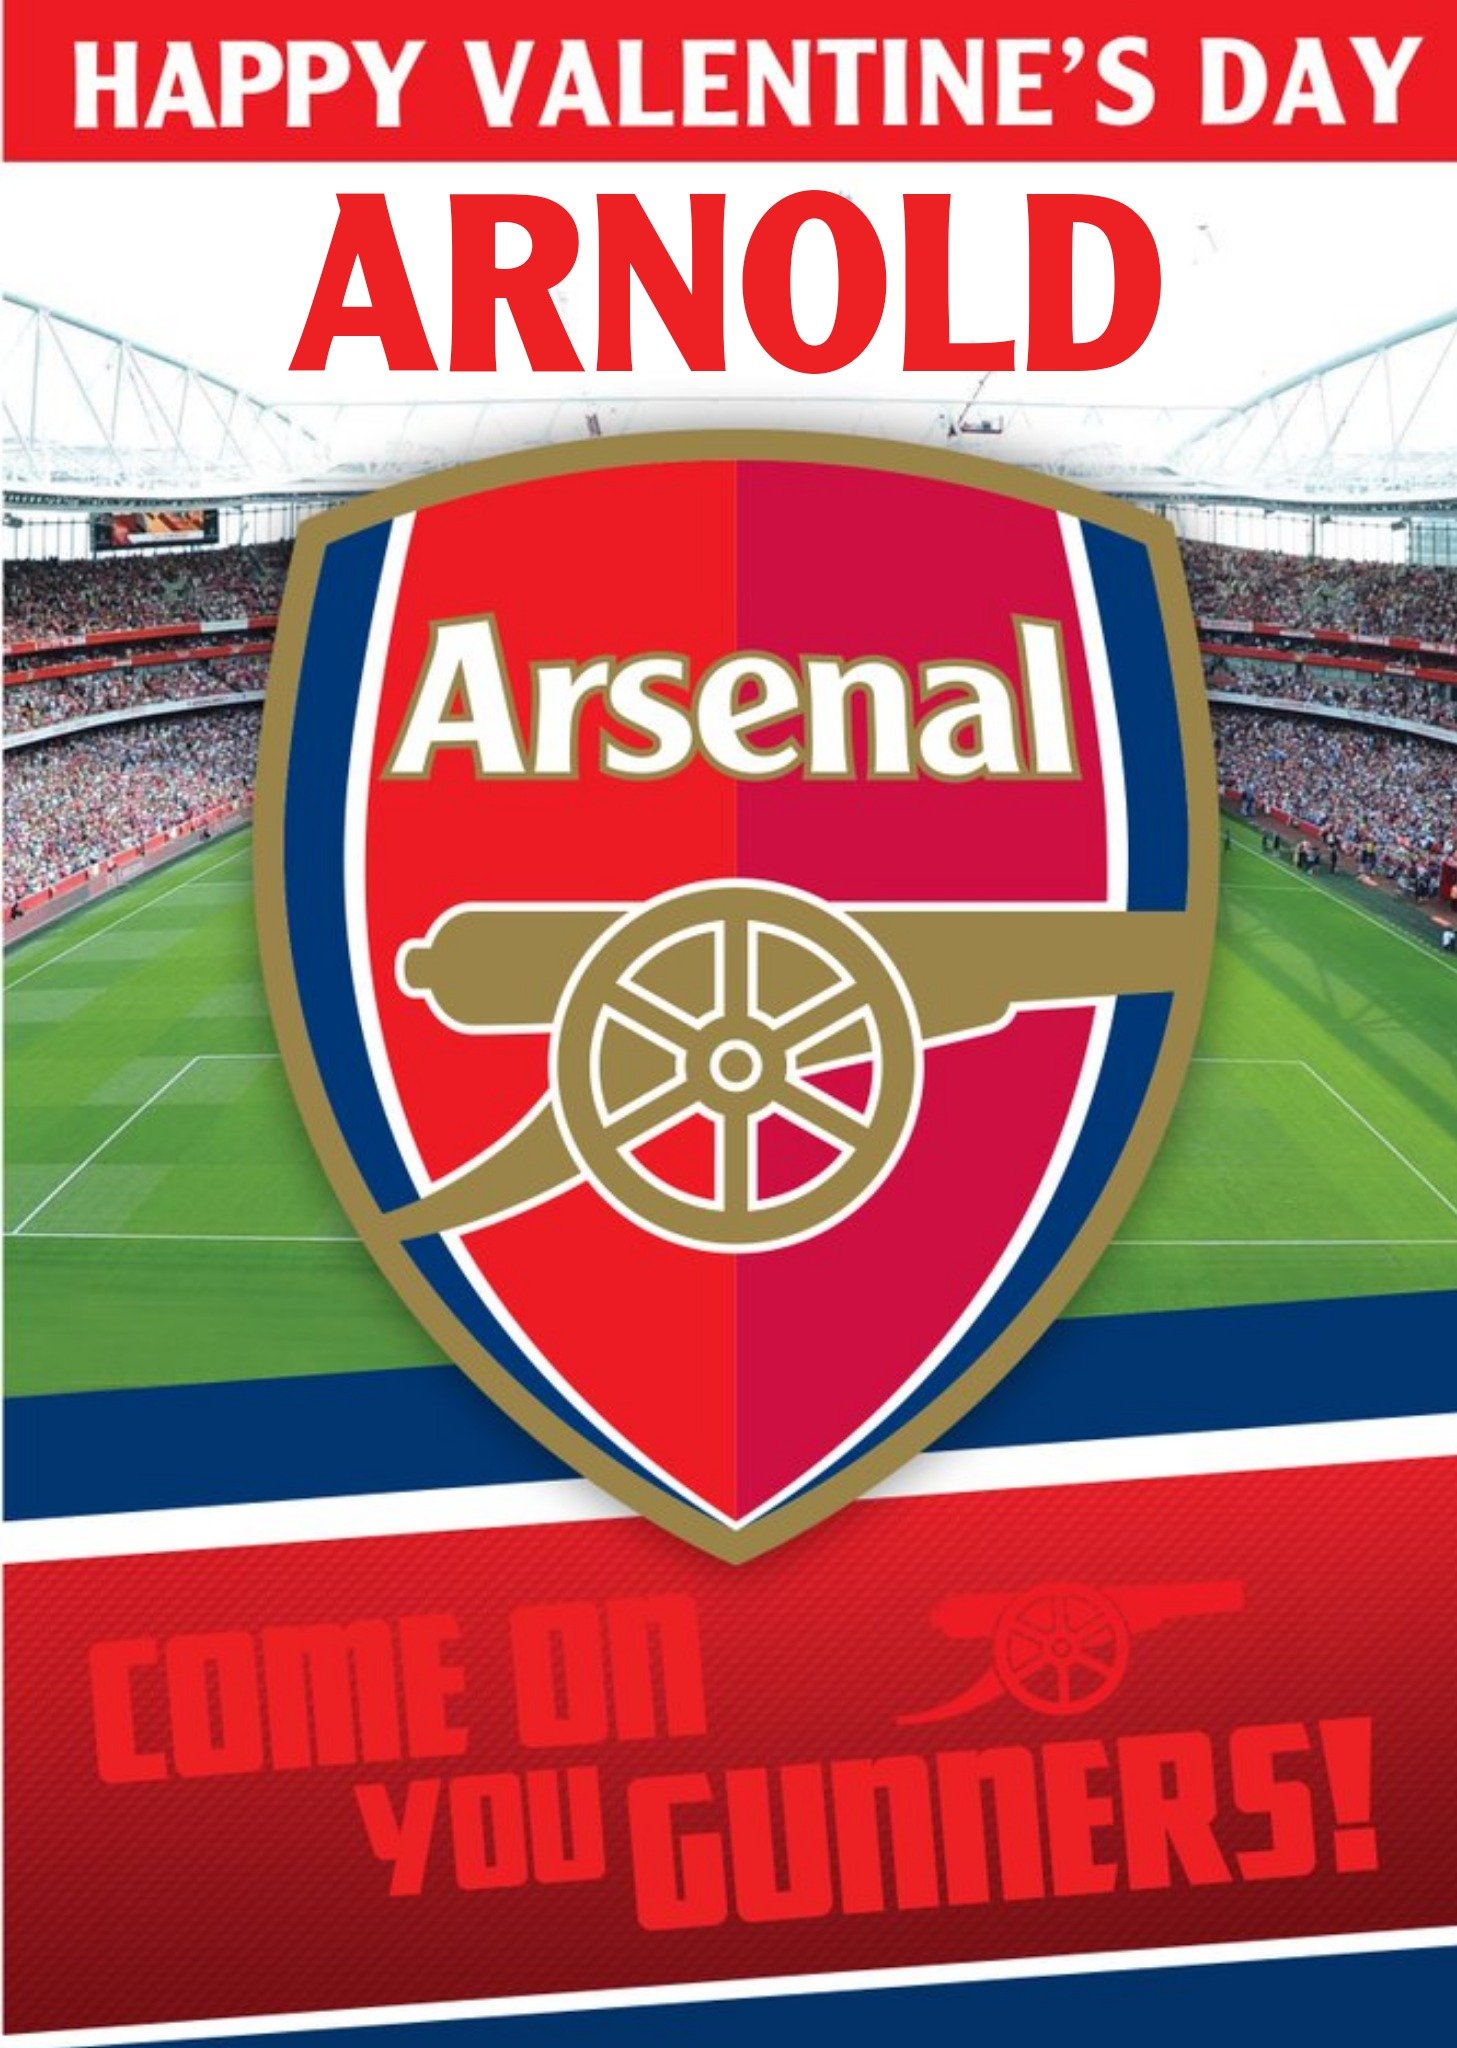 Arsenal Football Stadium Come On You Gunners Valentines Day Card Ecard